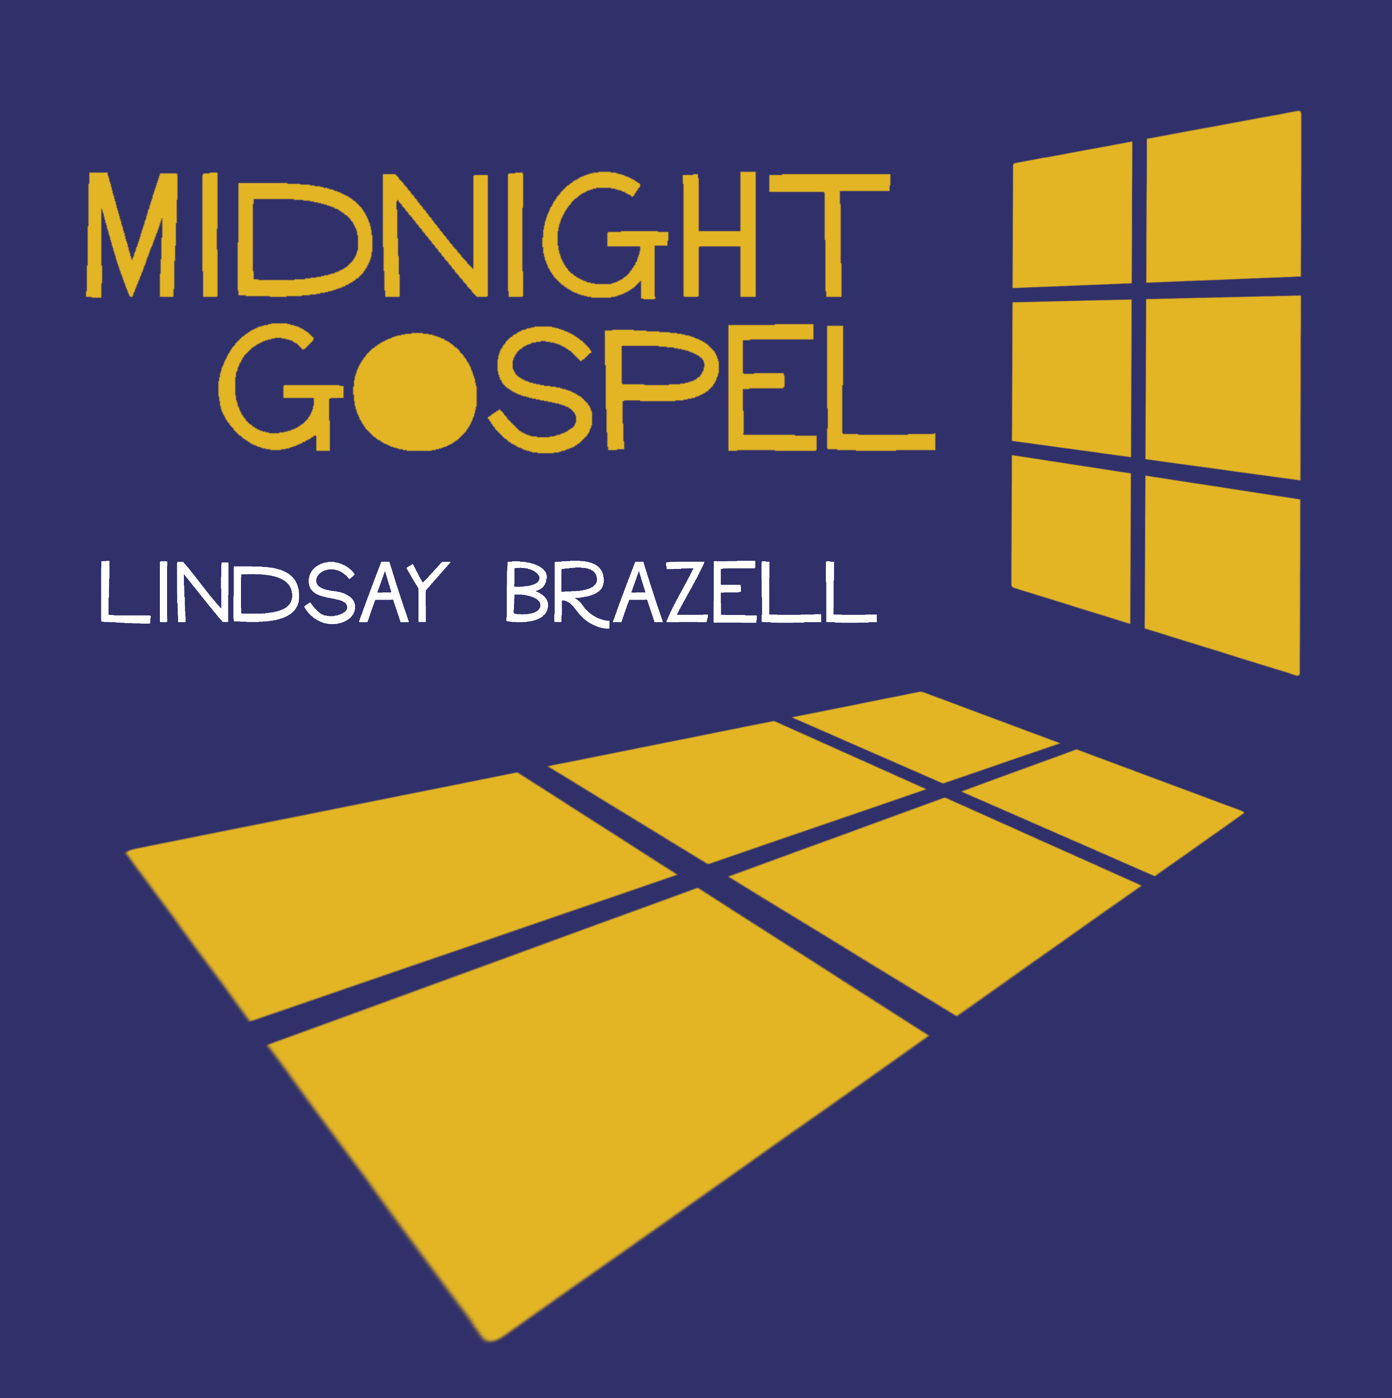 Lindsay Brazell reached the pinnacle of indie-folk with her single, ‘Midnight Gospel’.